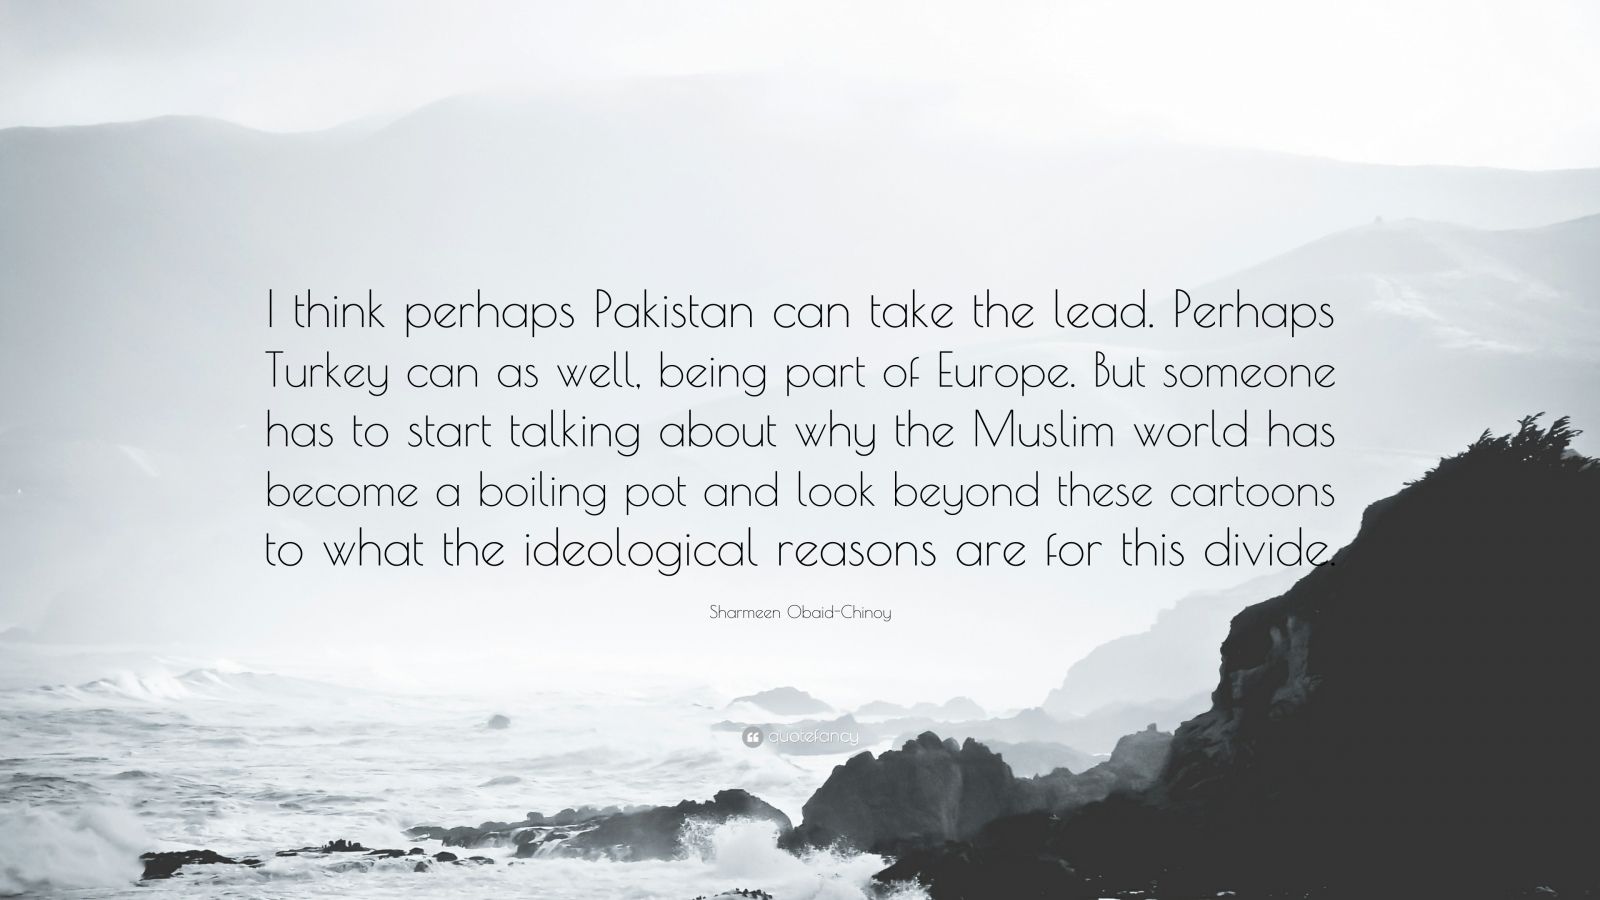 Sharmeen Obaid Chinoy Quote: “I Think Perhaps Pakistan Can Take The Lead. Perhaps Turkey Can As Well, Being Part Of Europe. But Someone Has To Start T.” (7 Wallpaper)